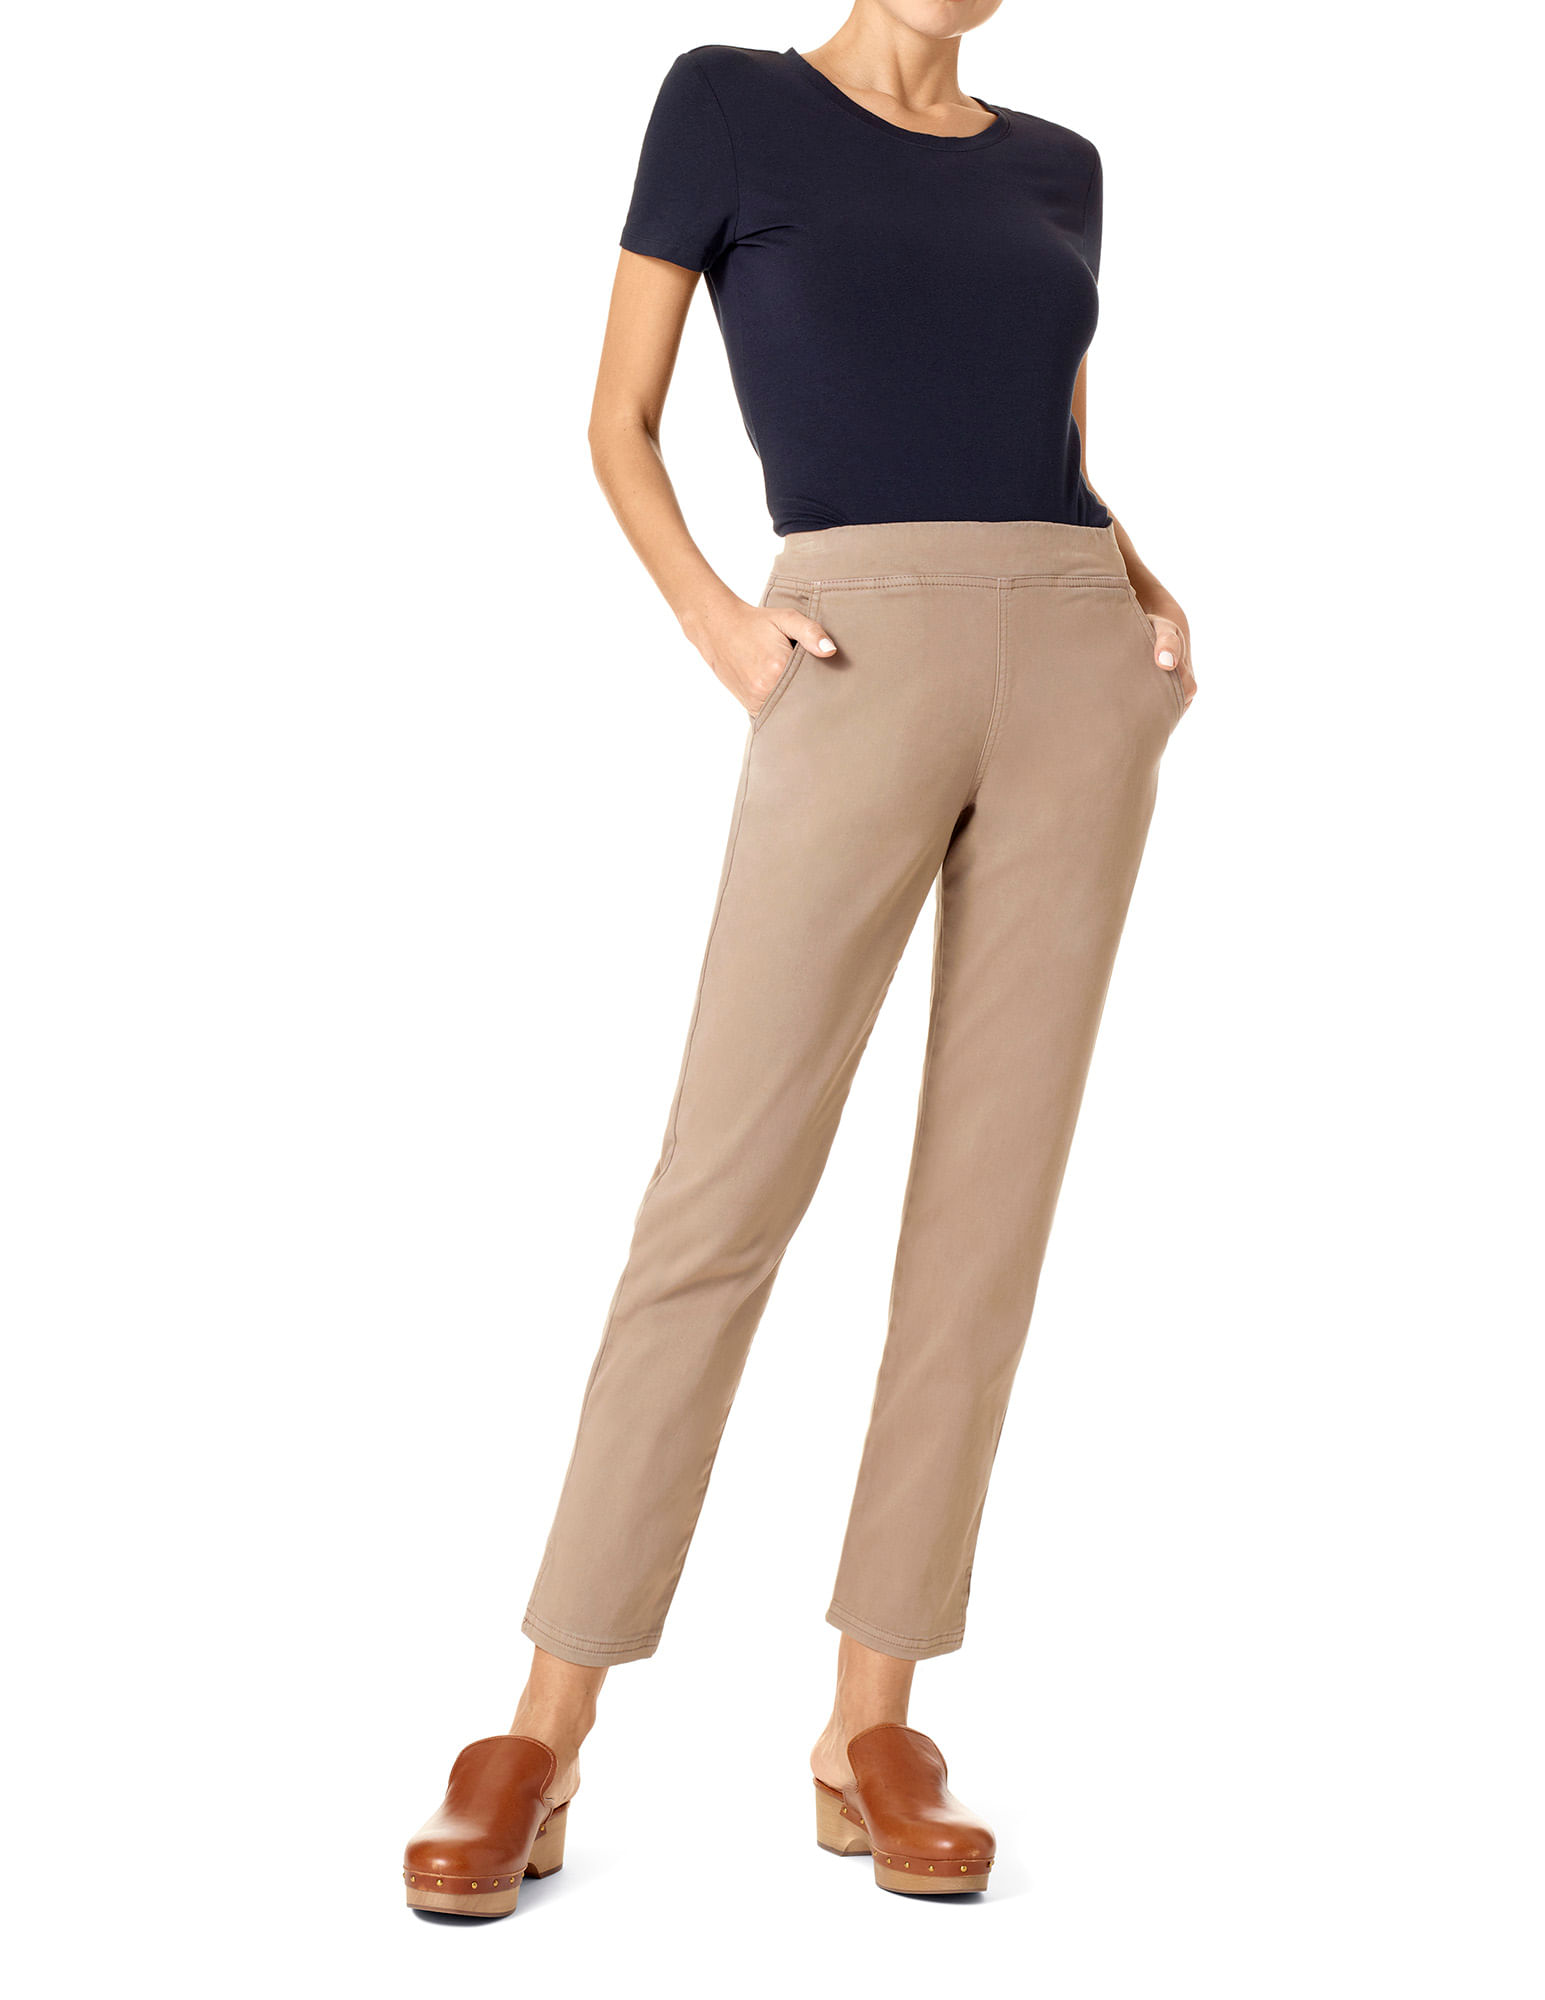 Soft Trouser Leggings with Functional Front Pockets | HUENewYork.ca